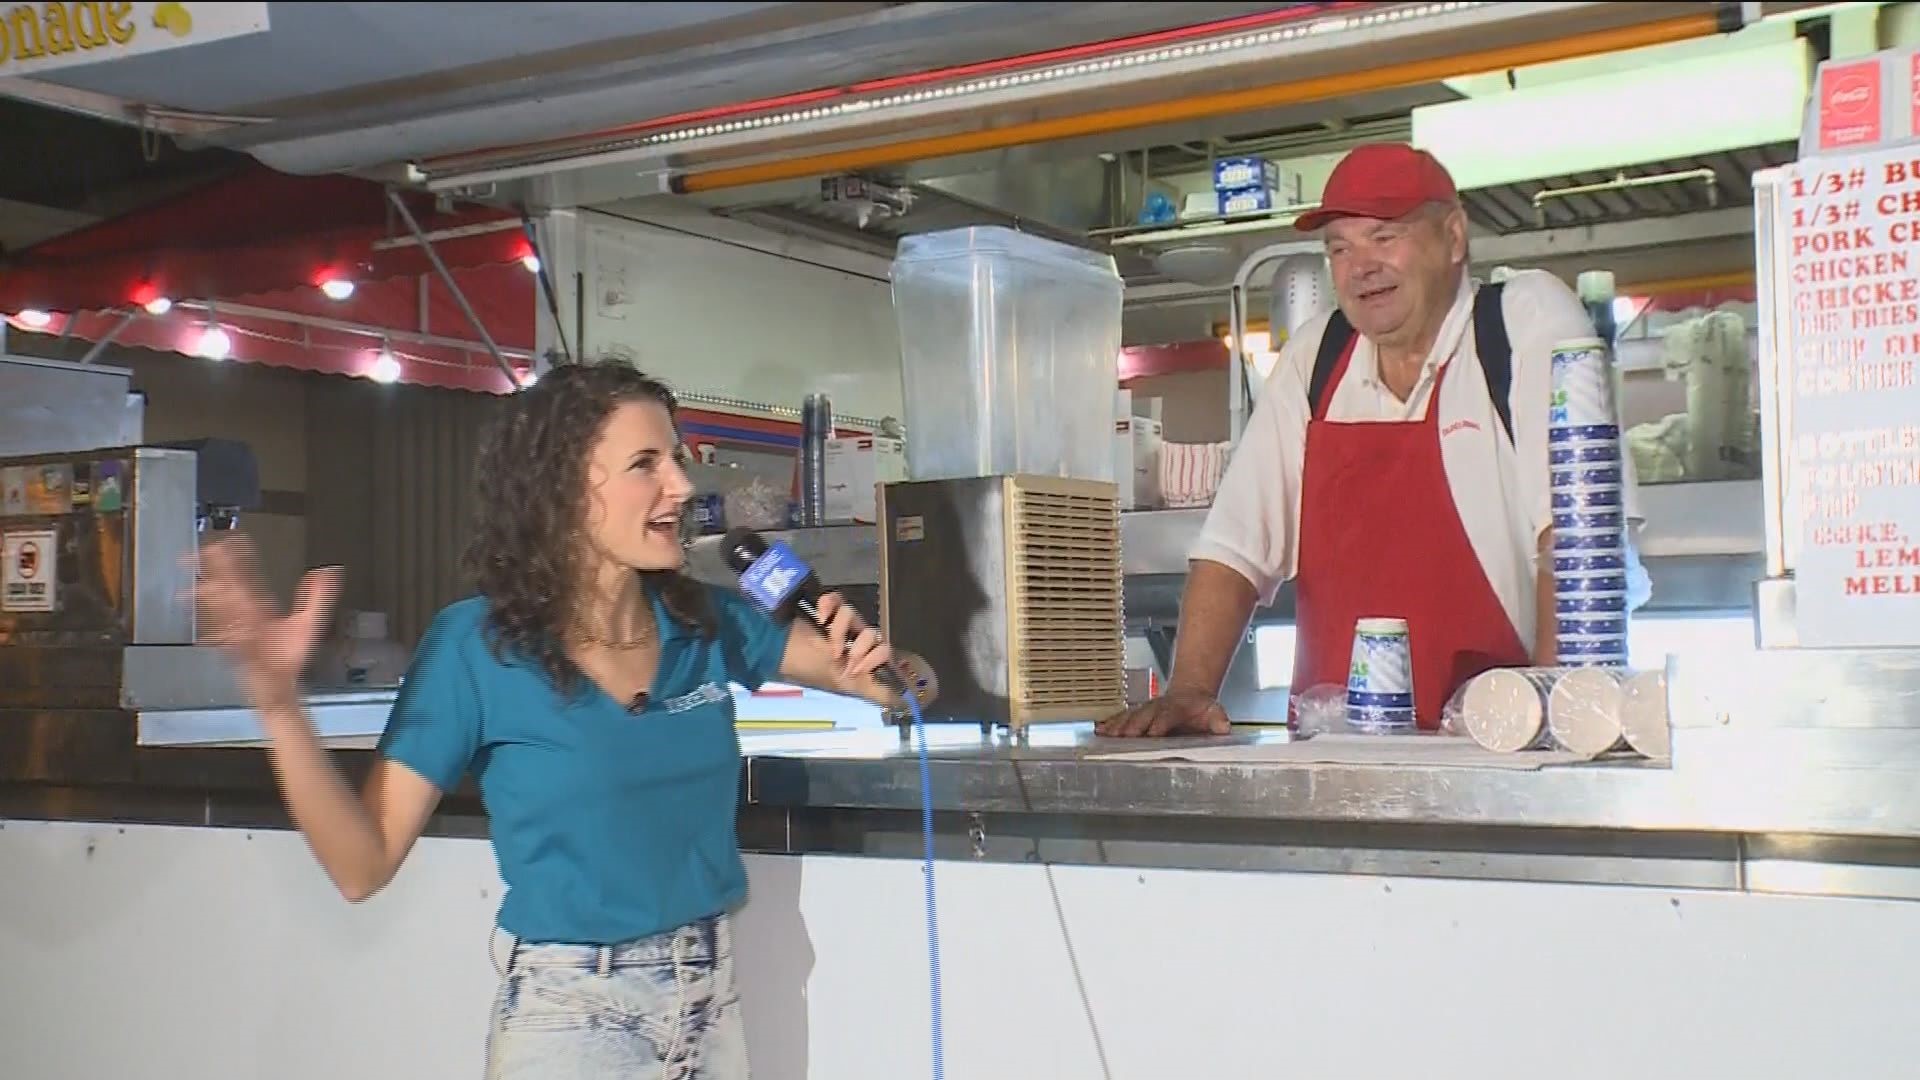 While visitors have a ton of fun, the Minnesota State Fair is 12 days of hard work for vendors like Doug of 3 Sisters Coffee and Breakfast.